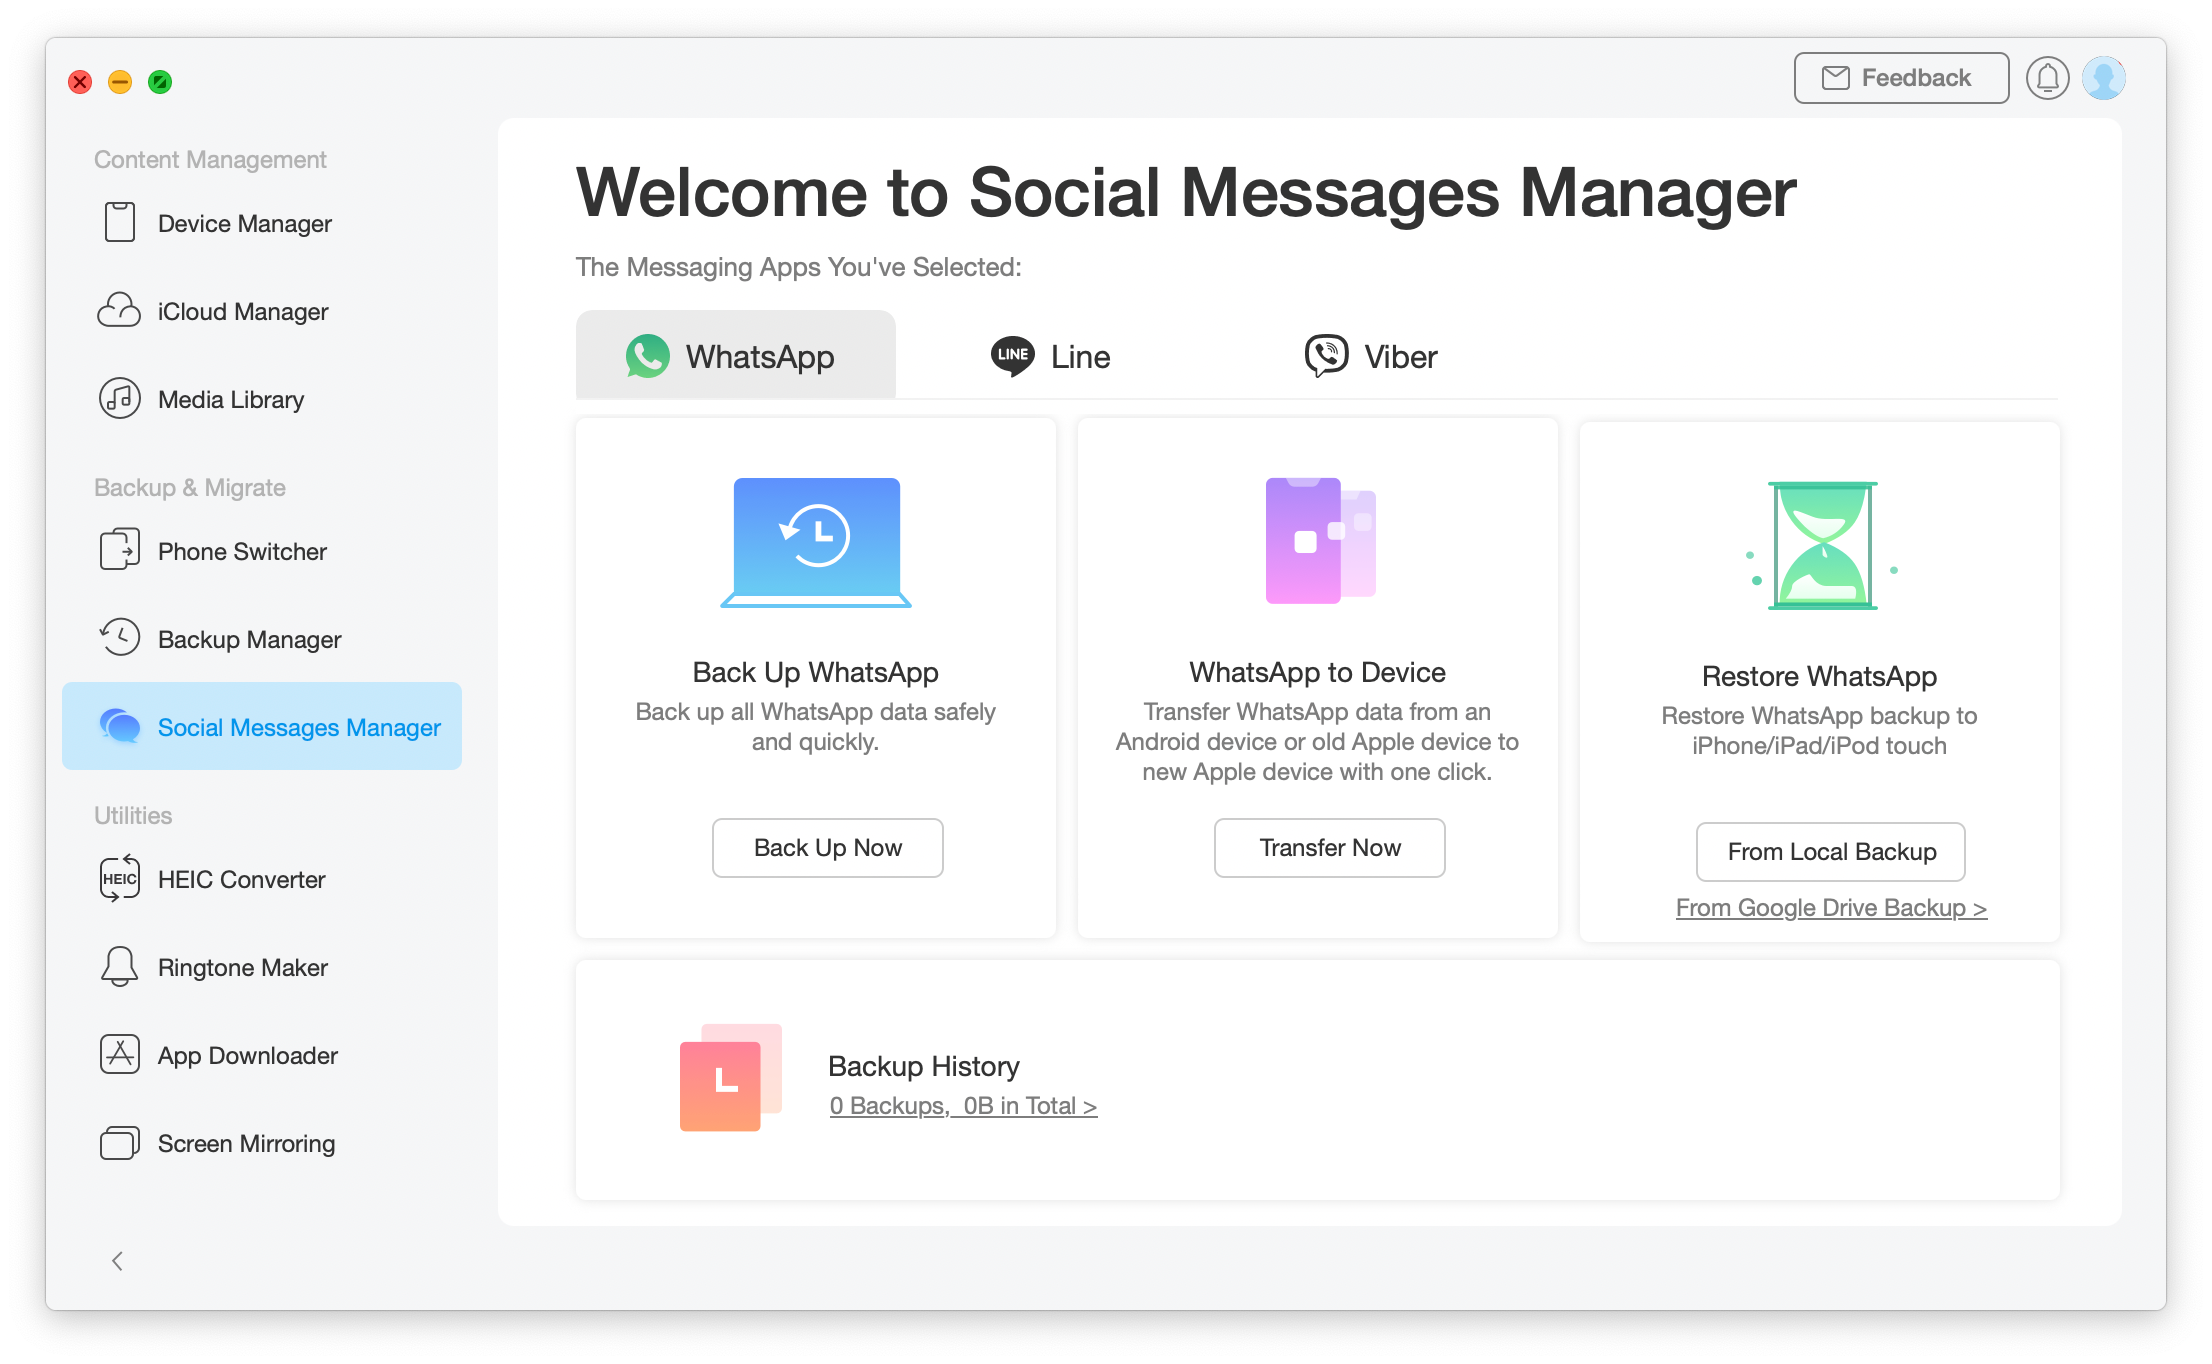 Social Messages Manager section in AnyTrans